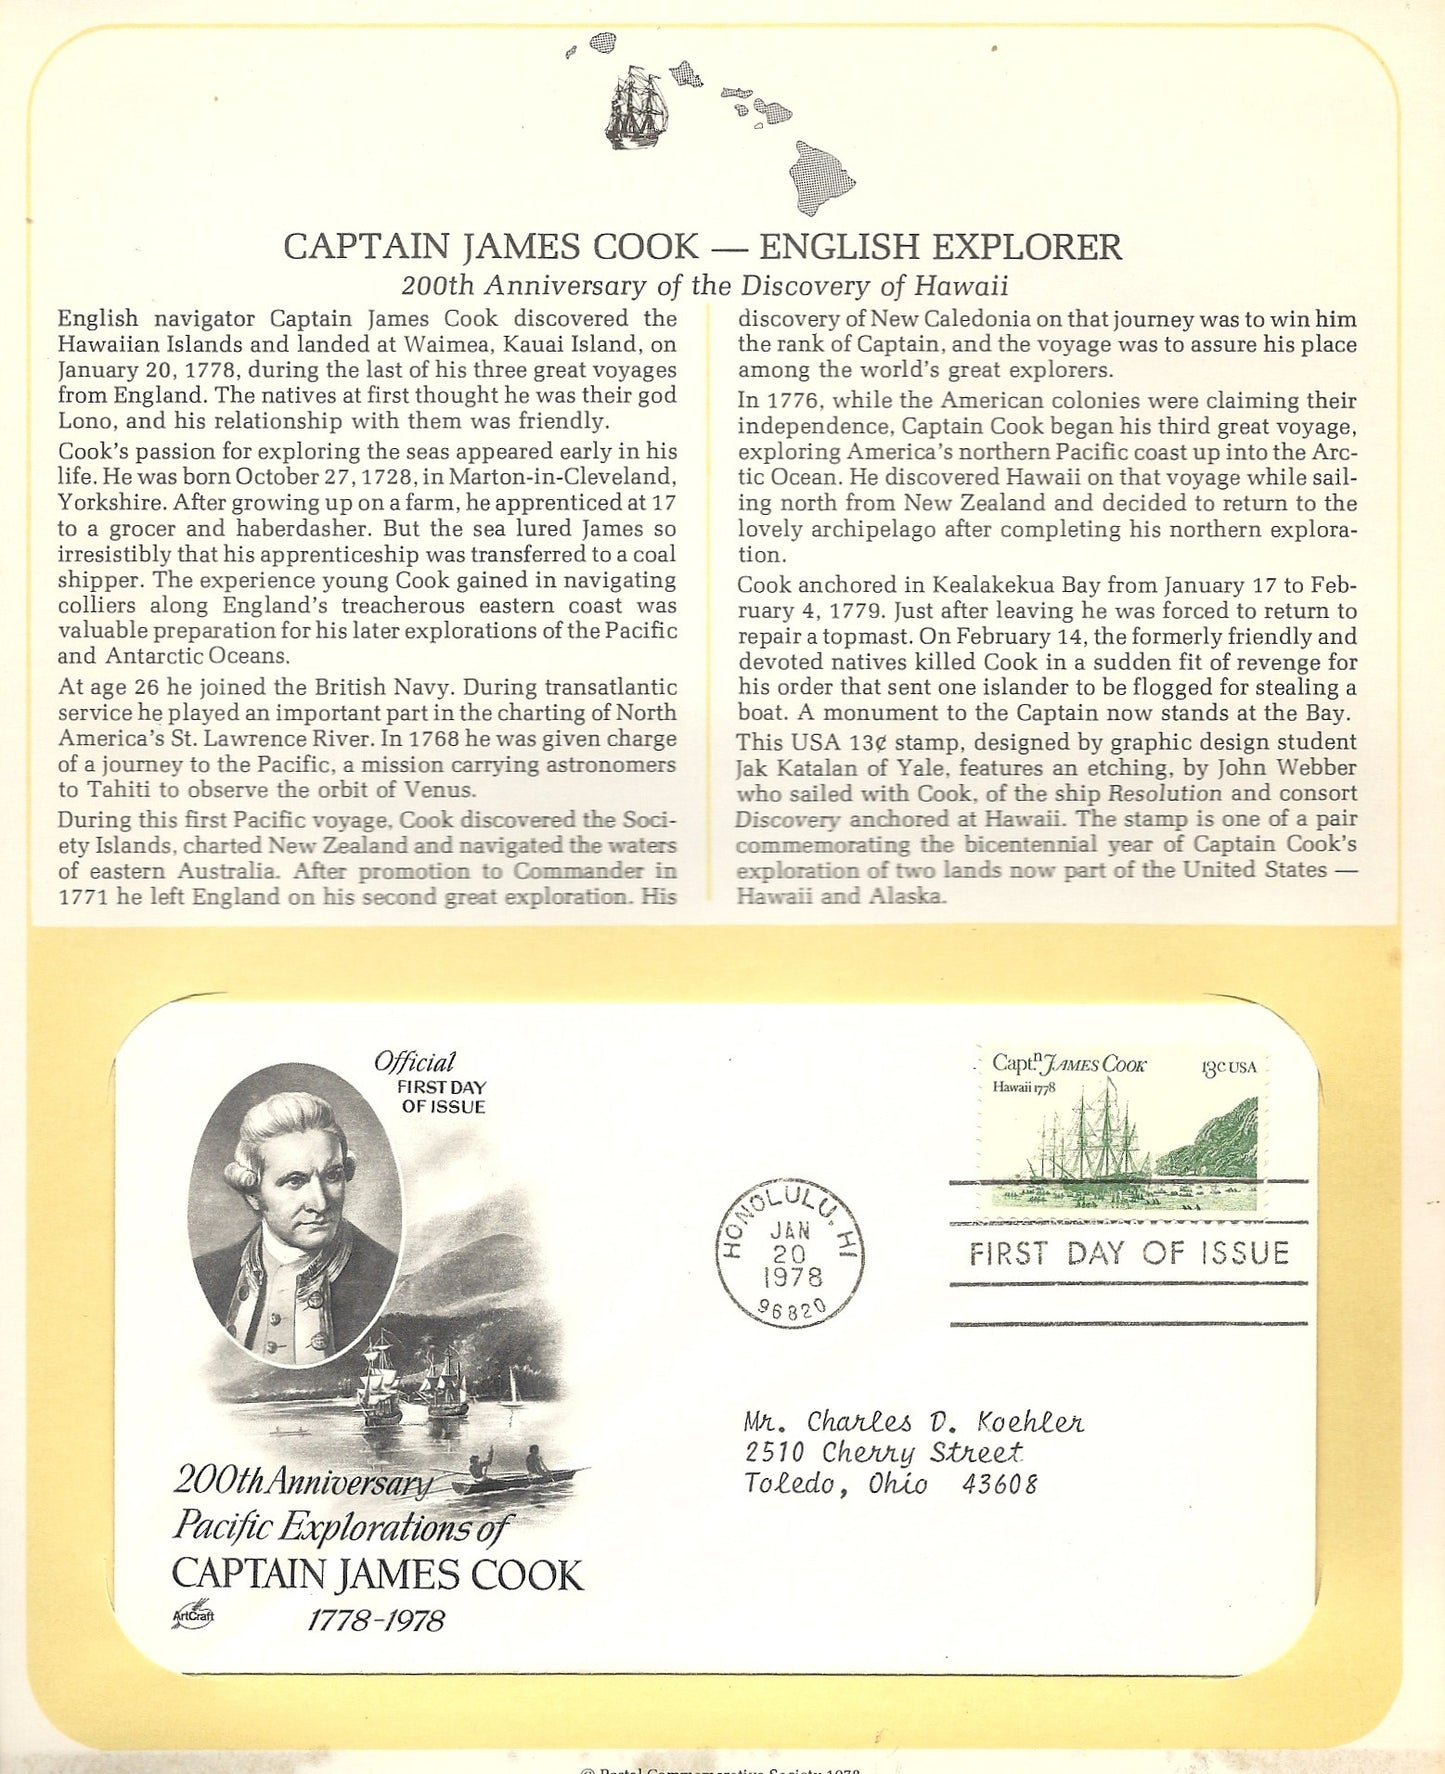 01 20 1978 FDC WH Captain James Cook